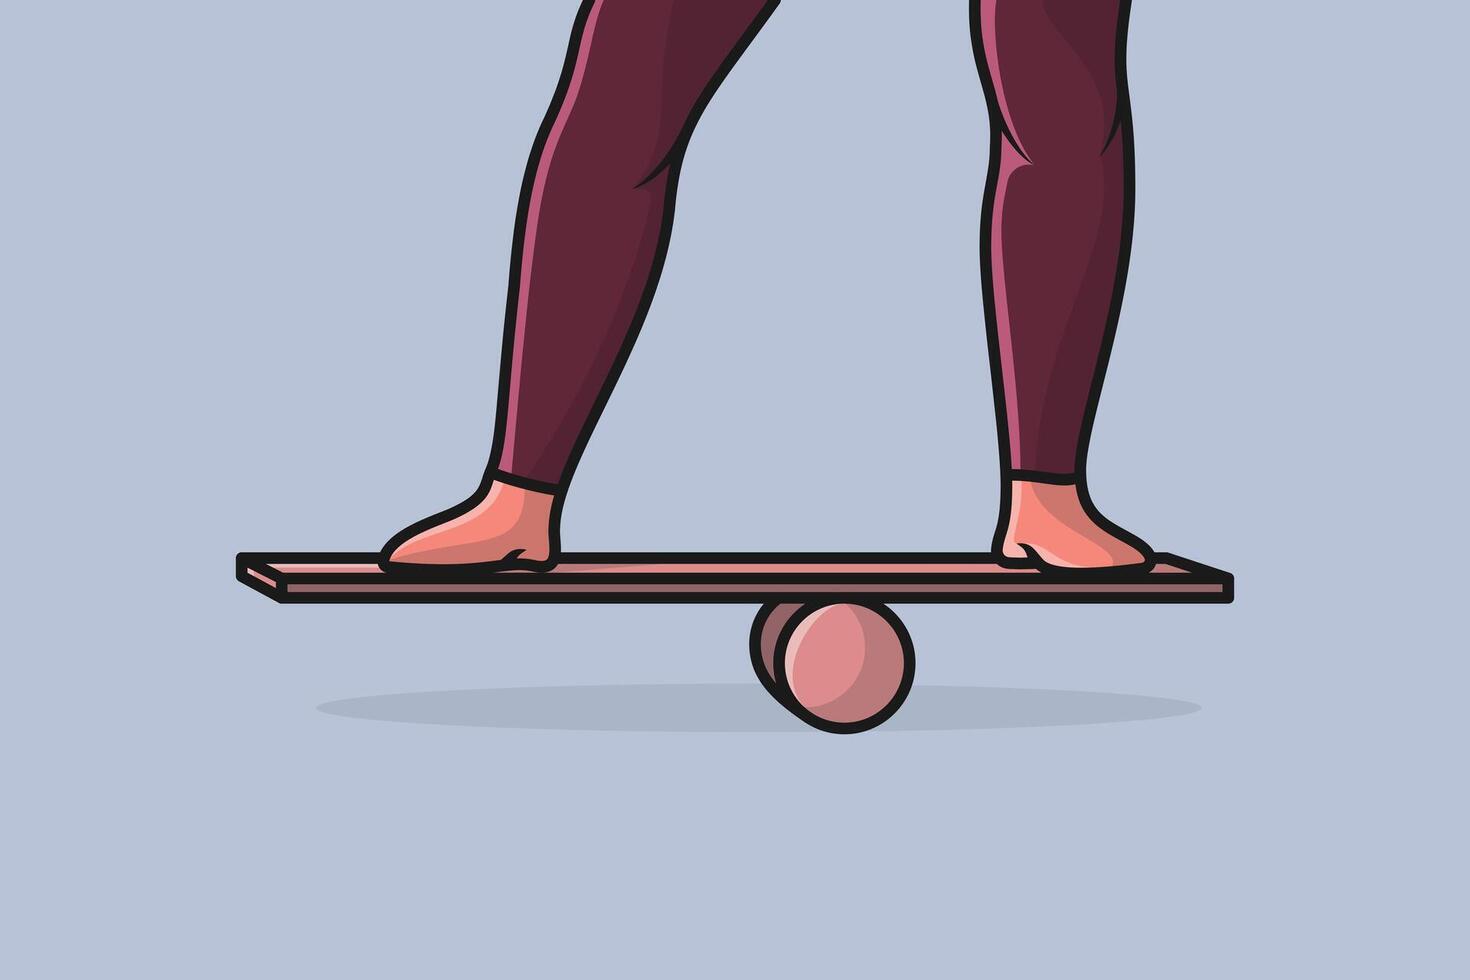 Man doing exercise on wooden balance board vector illustration. People sport activity icon concept. Healthy lifestyle fitness activity.